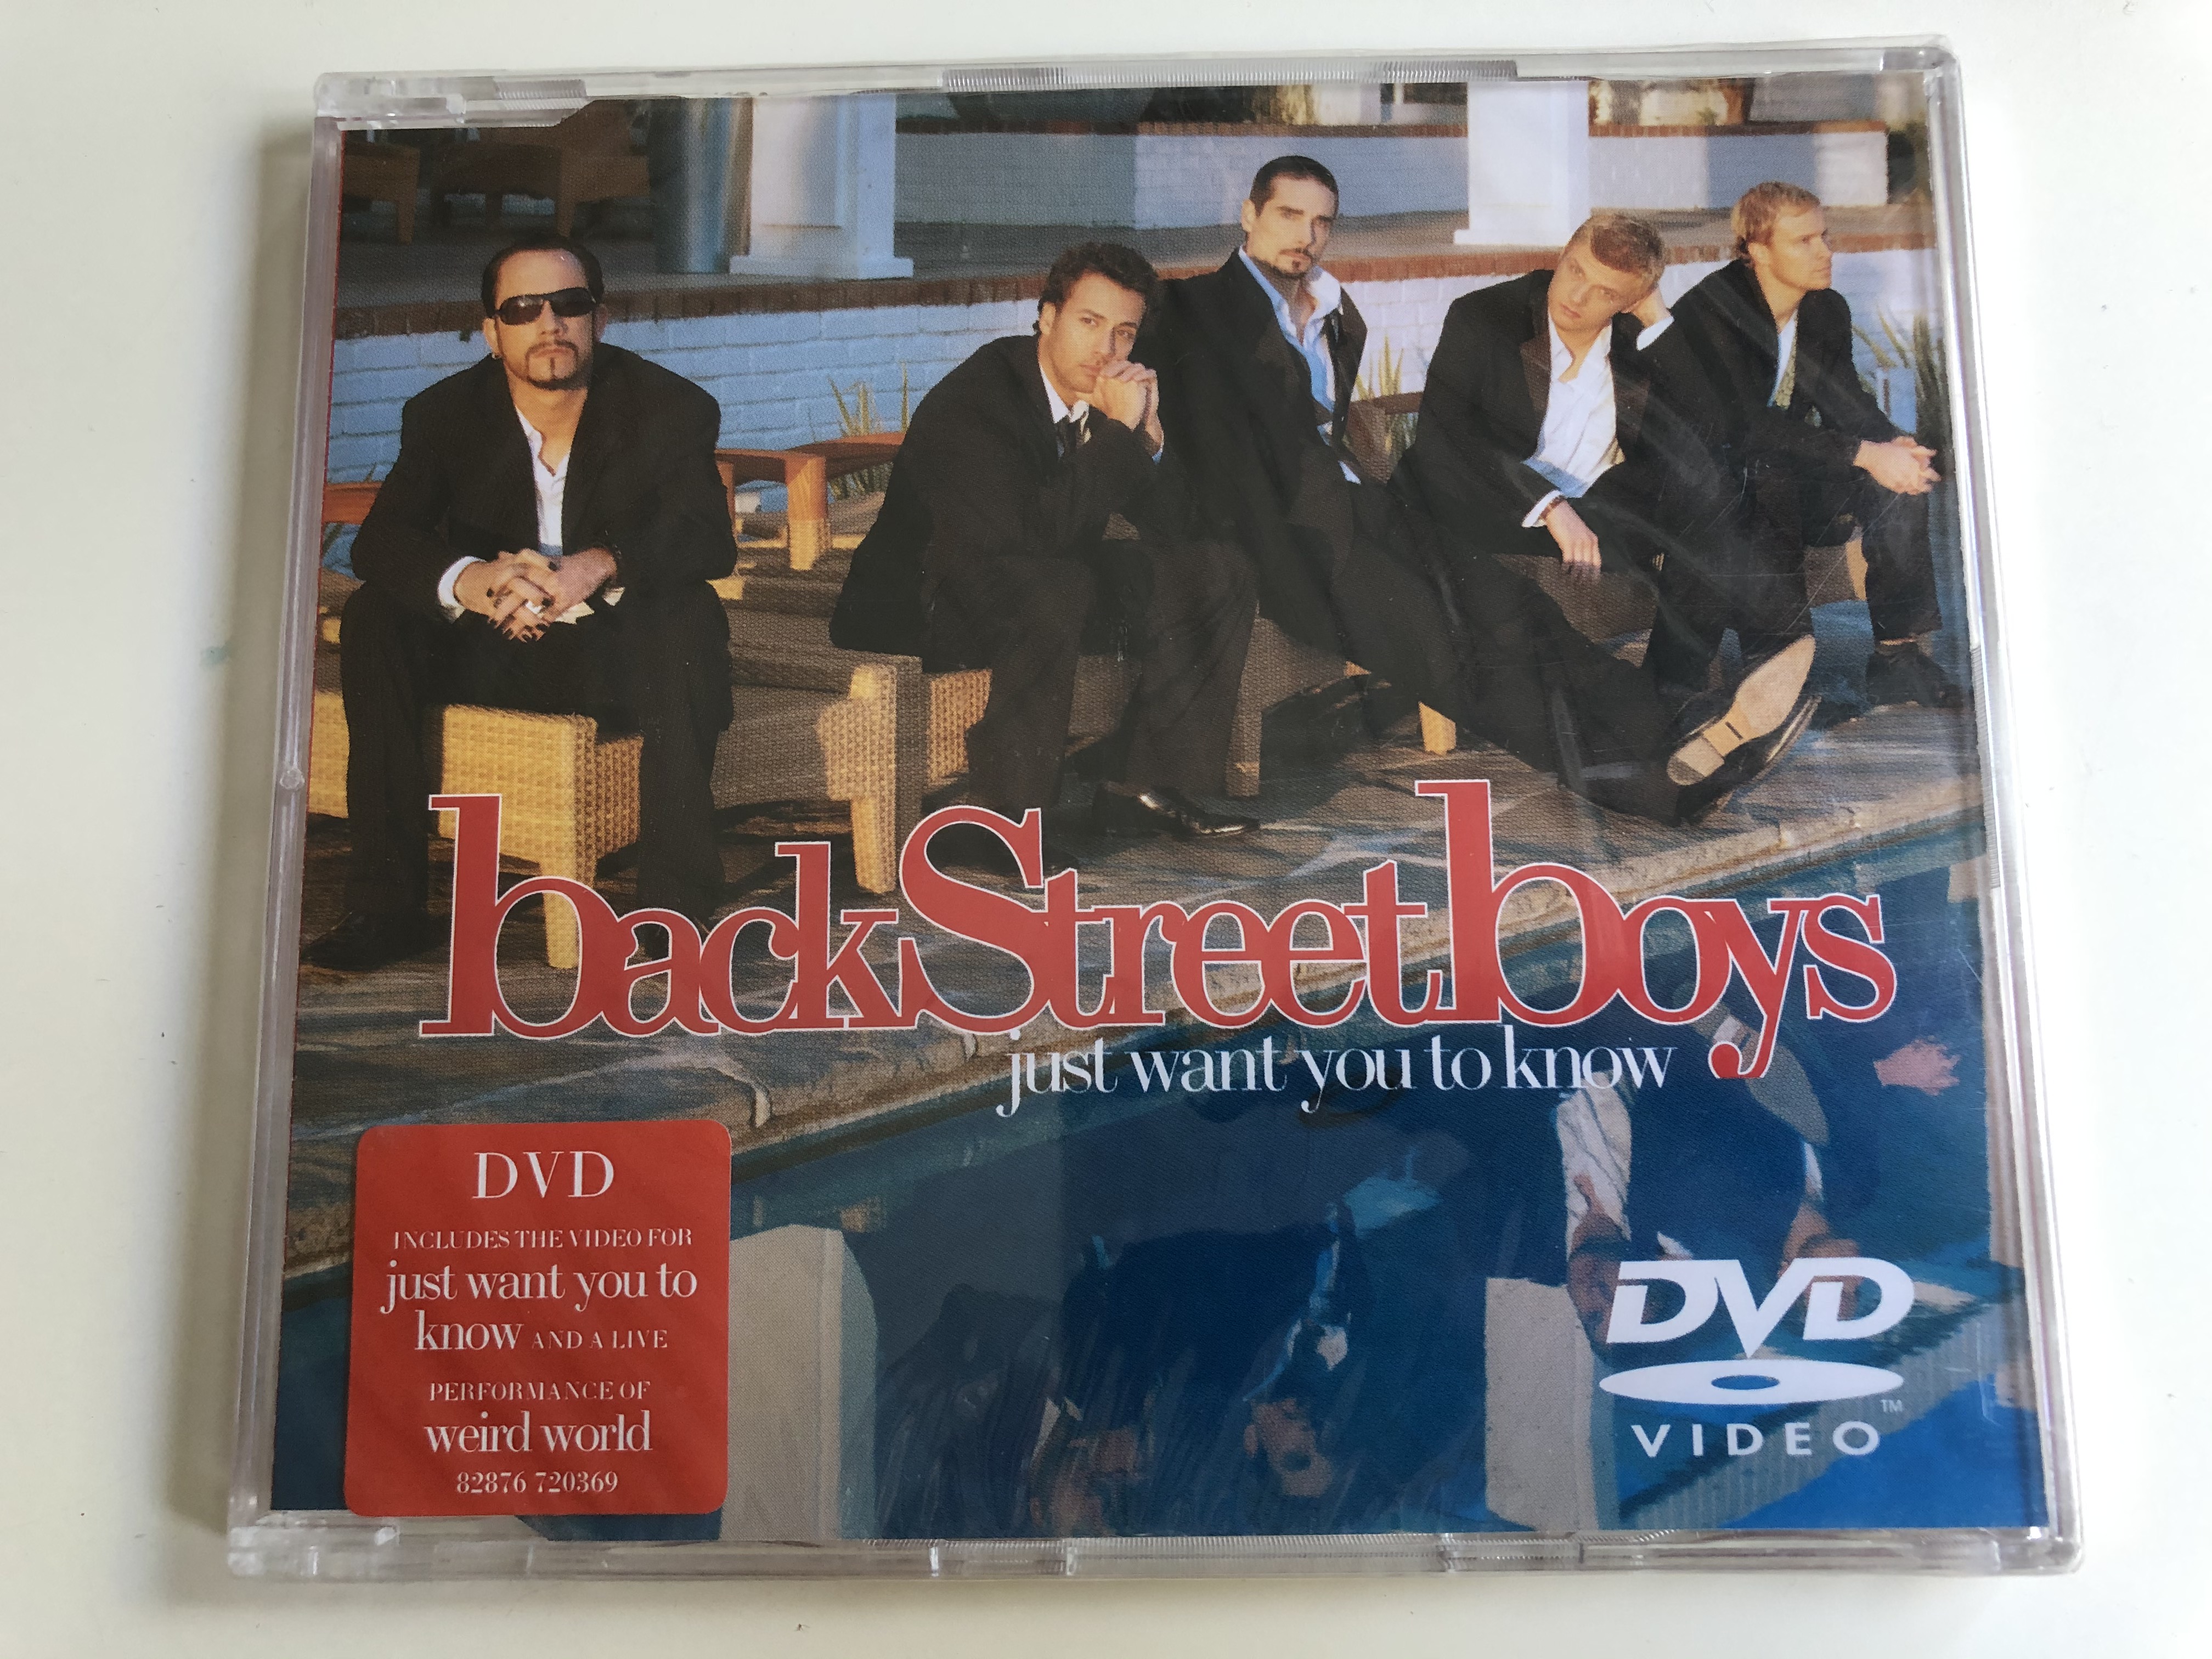 backstreetboys-just-want-you-to-know-jive-dvd-cd-2005-828767203690-1-.jpg